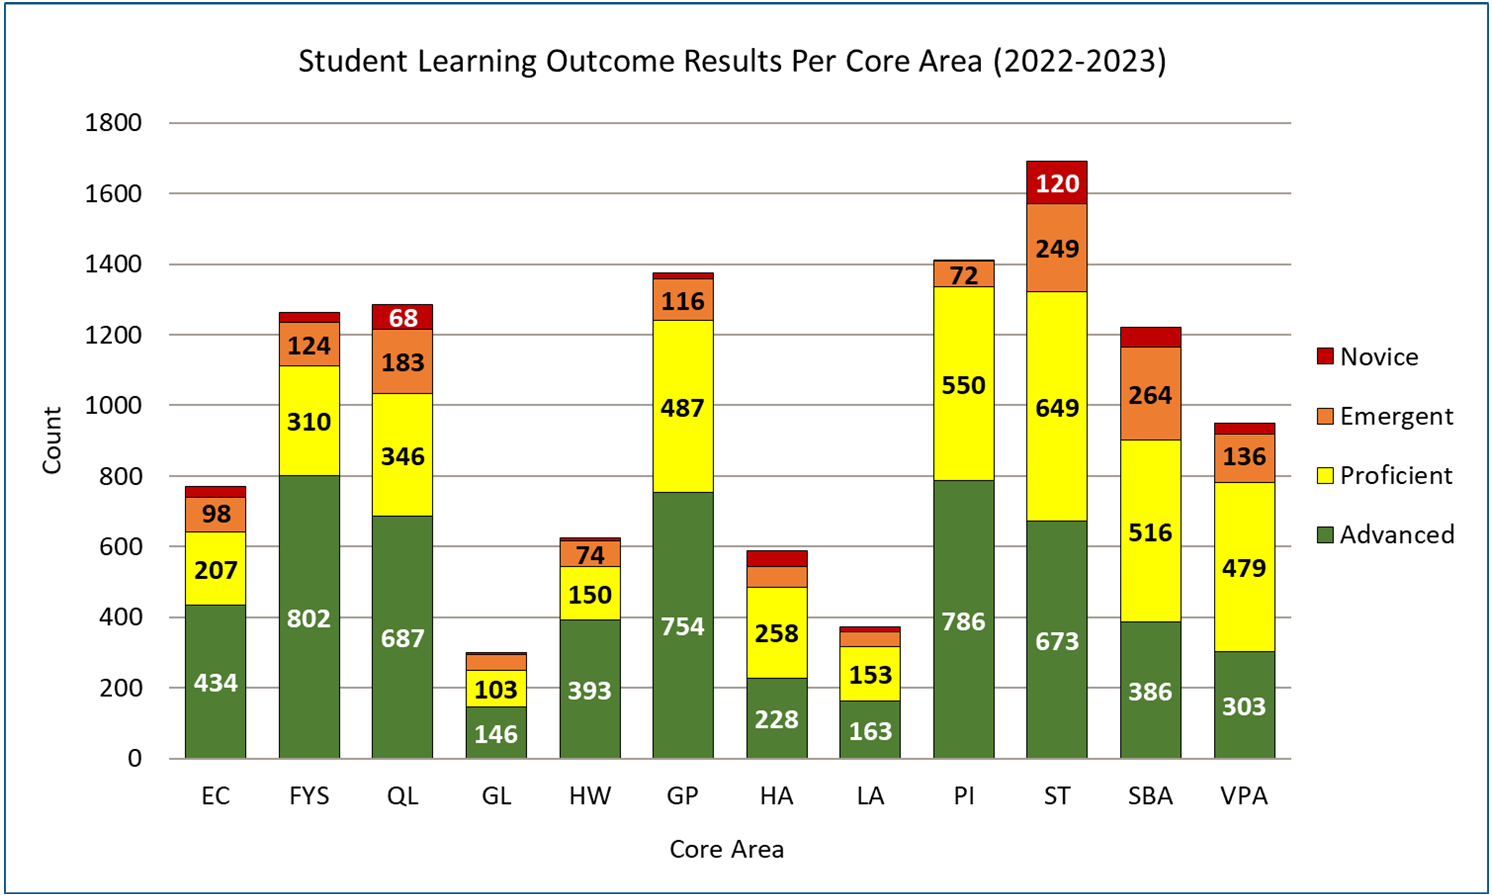 Graph of the count of 2022-2023 student outcome results within the Novice, Emergent, Proficient, or Advanced scoring categories. Results are shown for each Core area. Results: 641 students scored Proficient or Advanced for EC. 1112 students scored Proficient or Advanced for FYS. 1033 students scored Proficient or Advanced for QL. 249 students scored Proficient or Advanced for GL. 543 students scored Proficient or Advanced for HW. 1241 students scored Proficient or Advanced for GP. 486 students scored Proficient or Advanced for HA. 316 students scored Proficient or Advanced for LA. 1336 students scored Proficient or Advanced for PI. 1322 students scored Proficient or Advanced for ST. 902 students scored Proficient or Advanced for SBA. 782 students scored Proficient or Advanced for VPA.